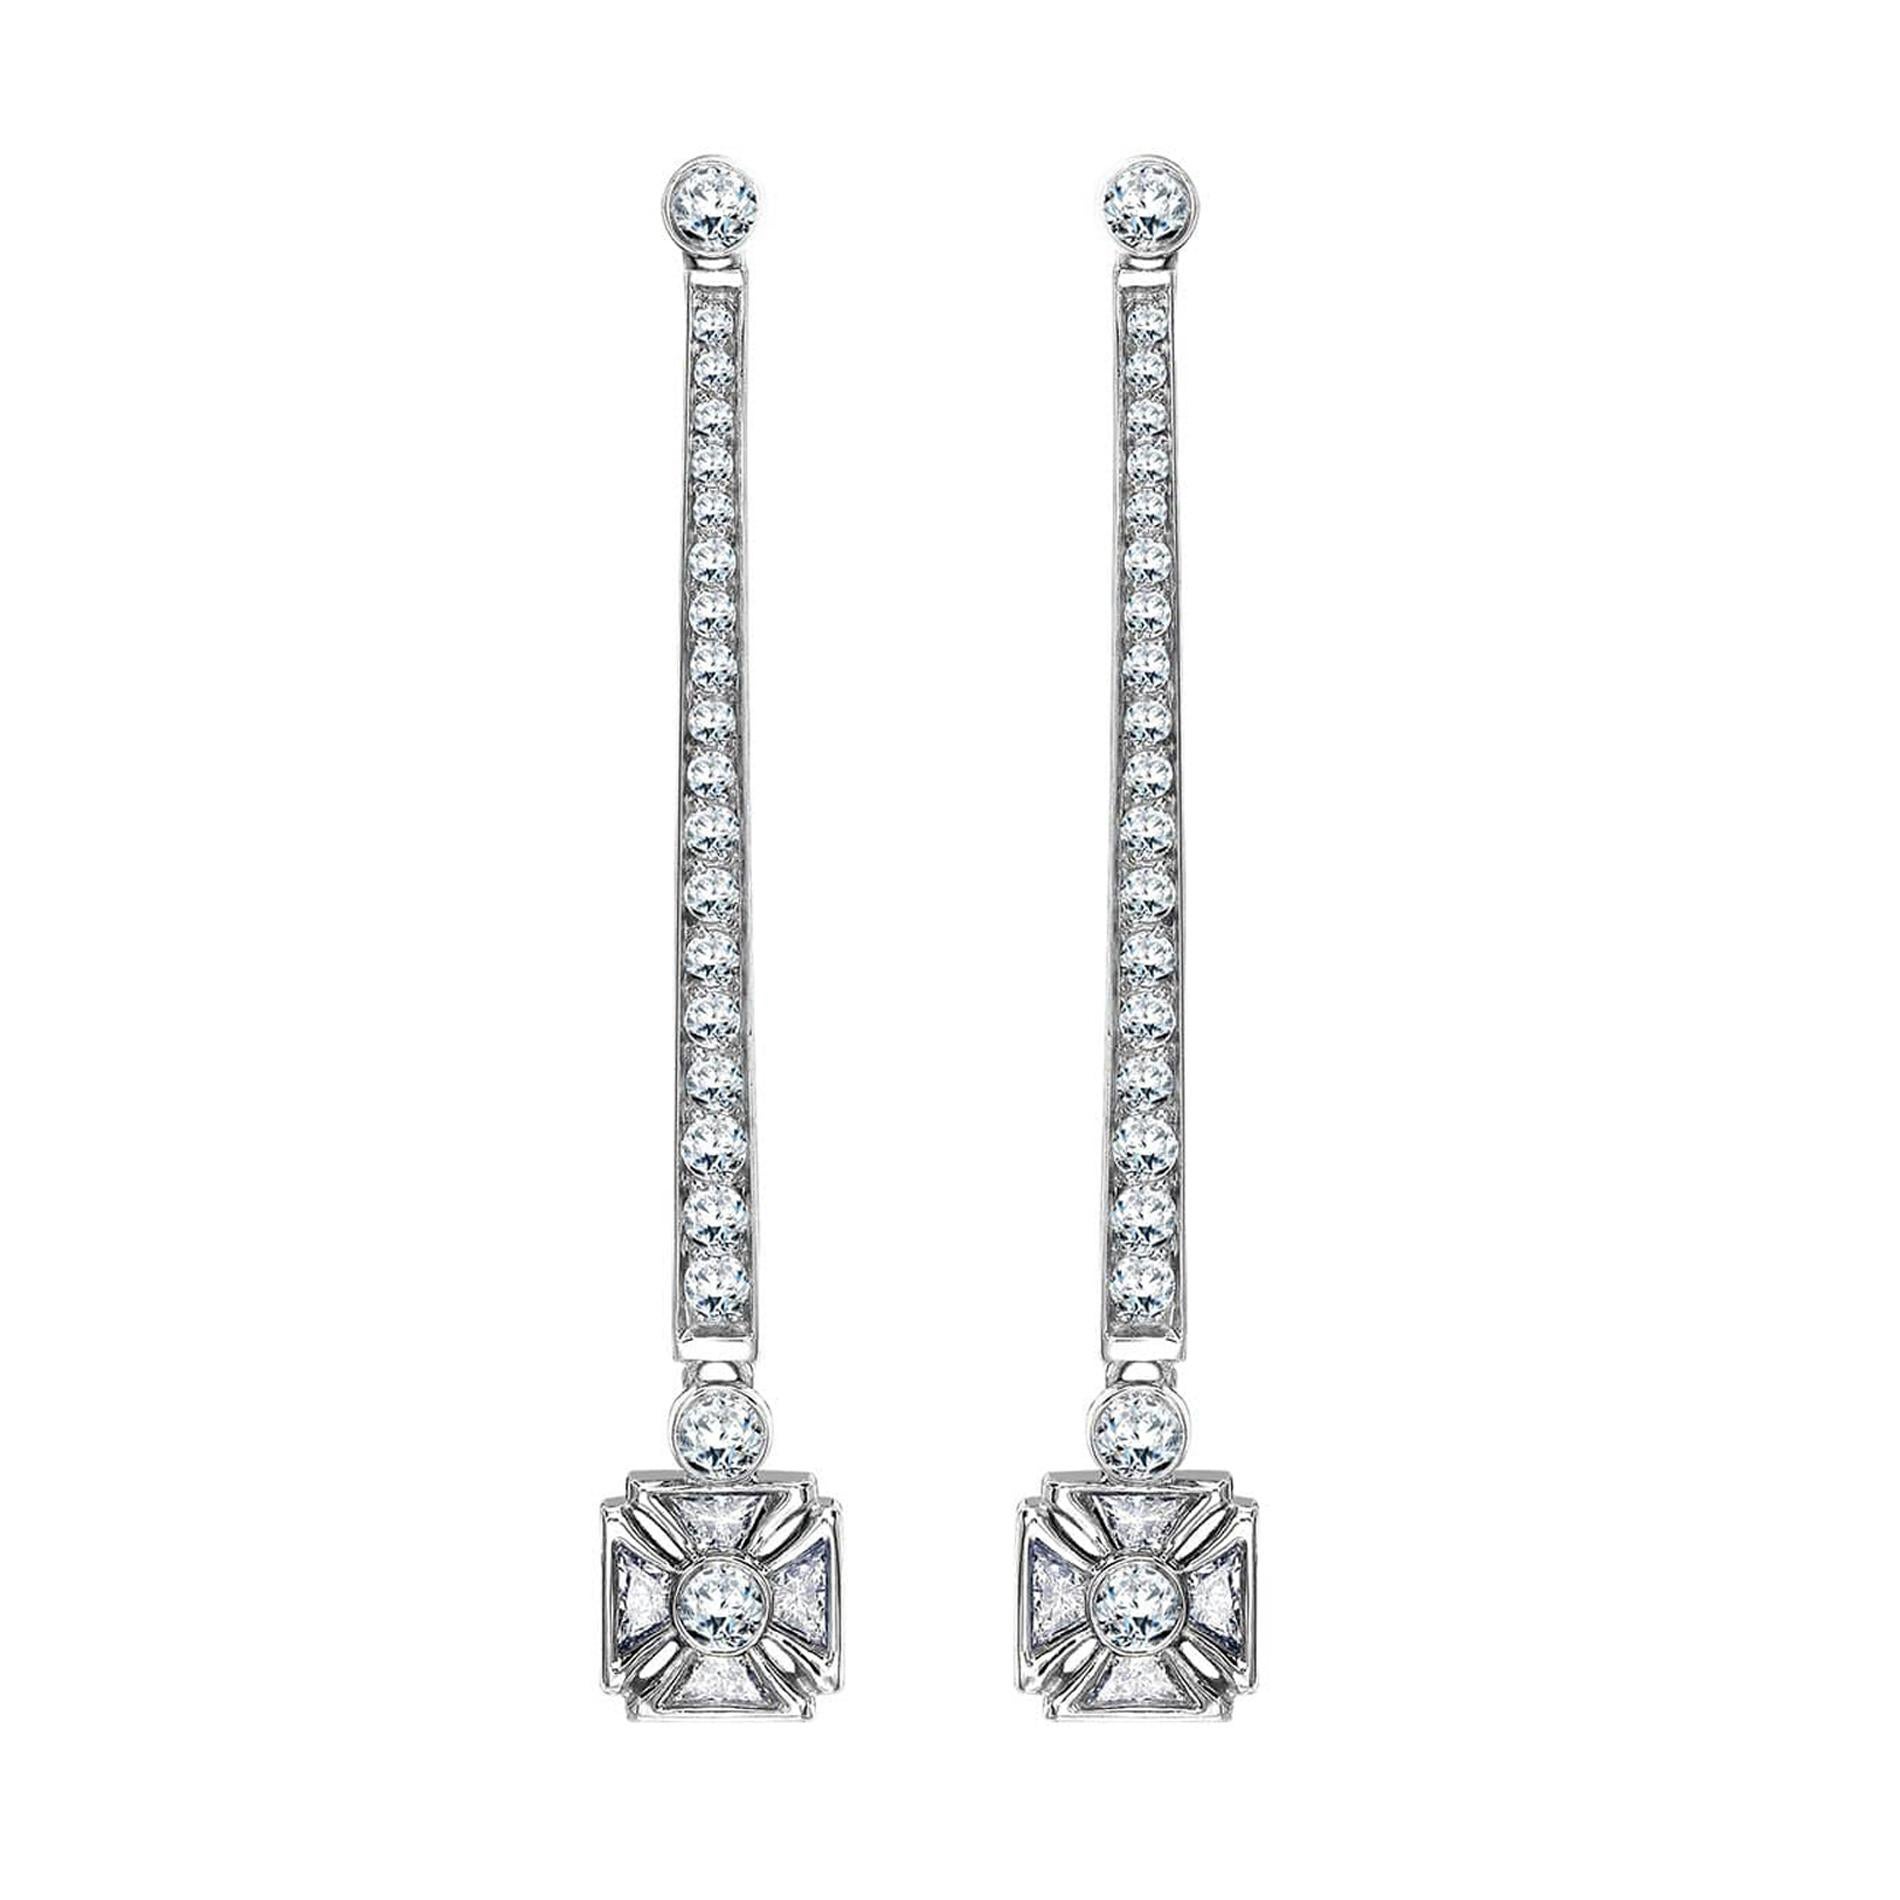 Sybarite Royal Jubilee Earrings in White Gold with White Diamonds